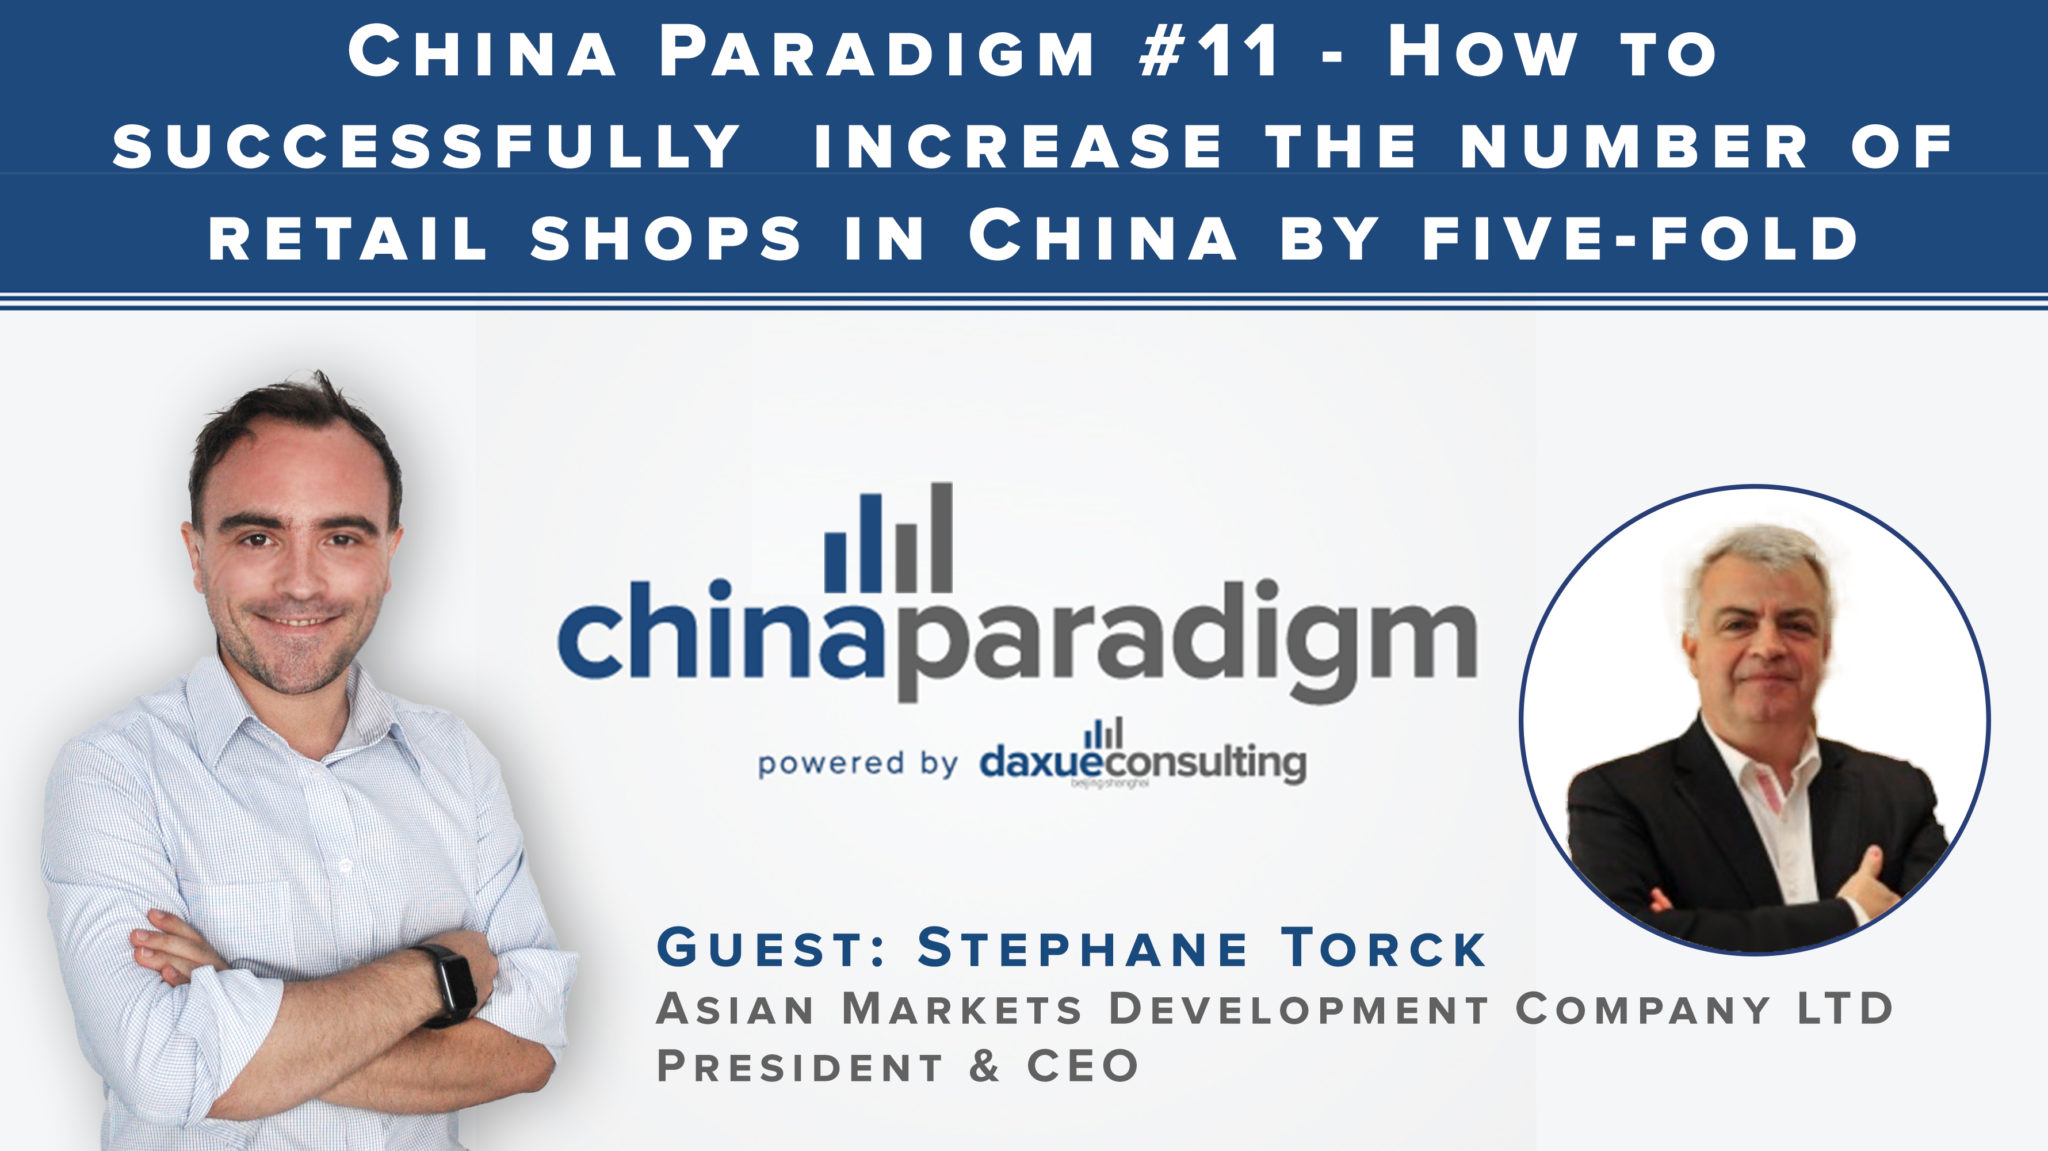 [Podcast] China paradigm episode #11: How to successfully increase the number of retail shops in China by five-fold